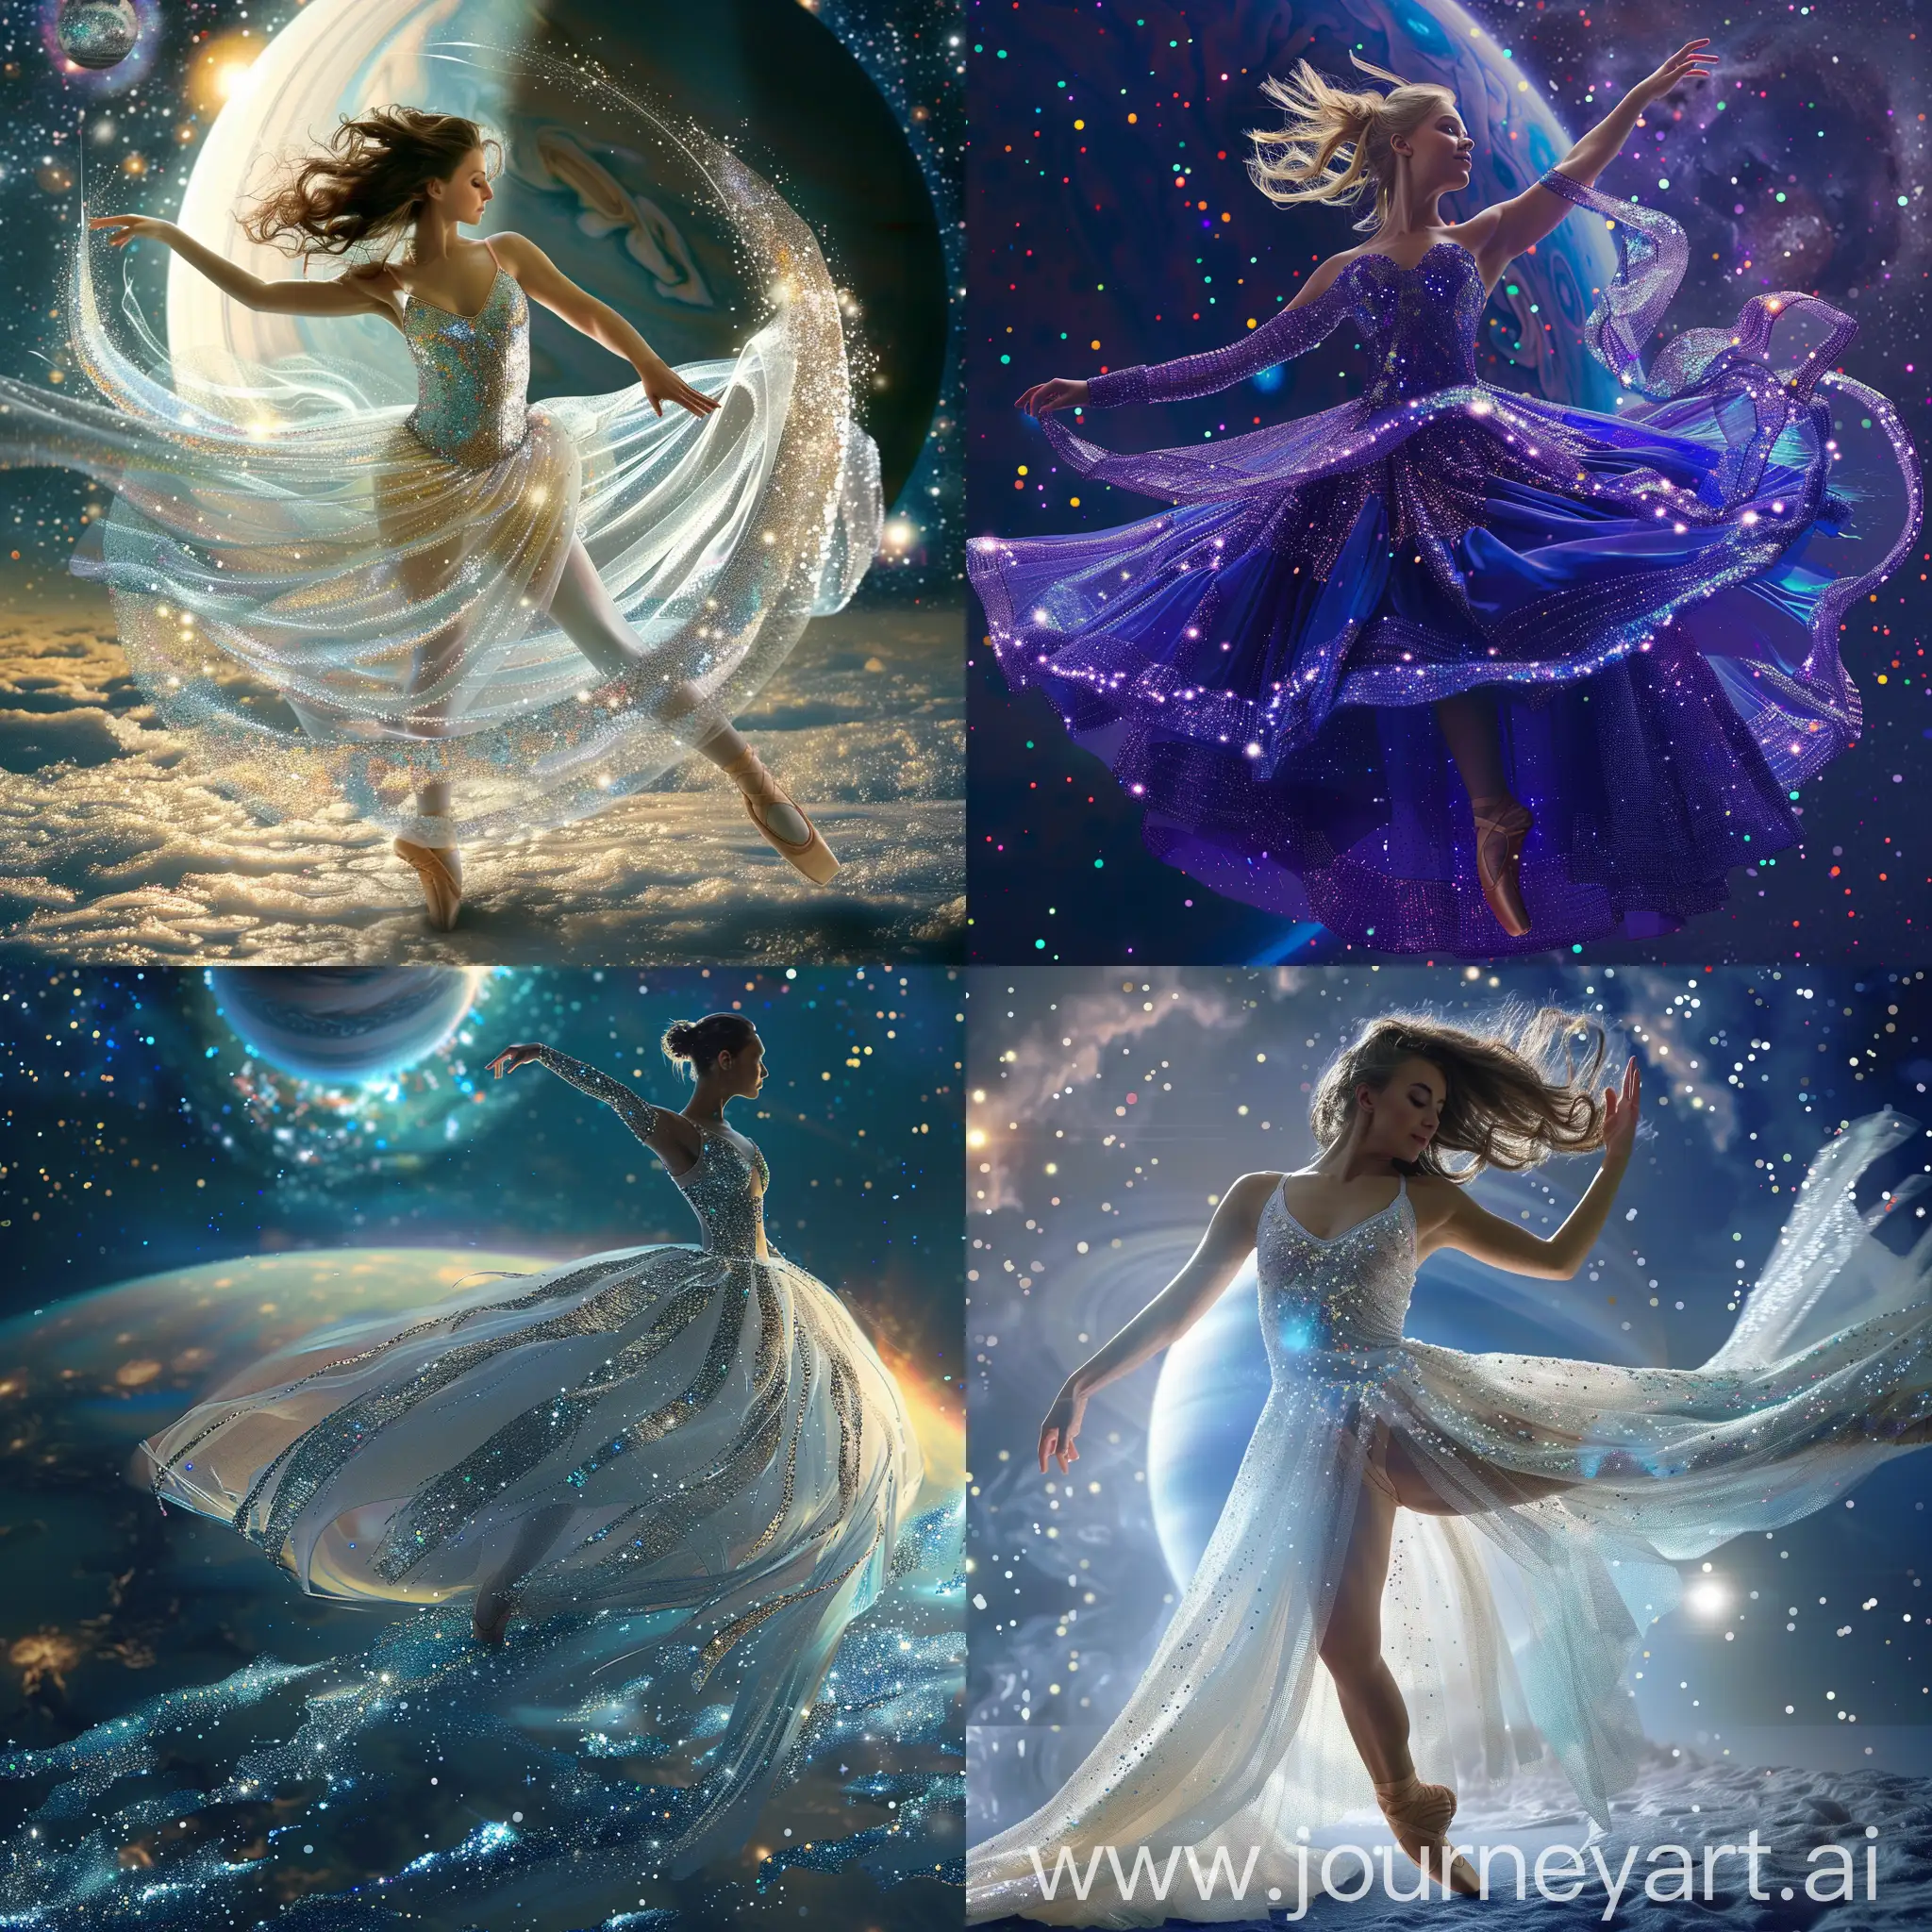 A beautiful ballet dancer dancing on the planet Neptune. The sequins on her dress are sparkling